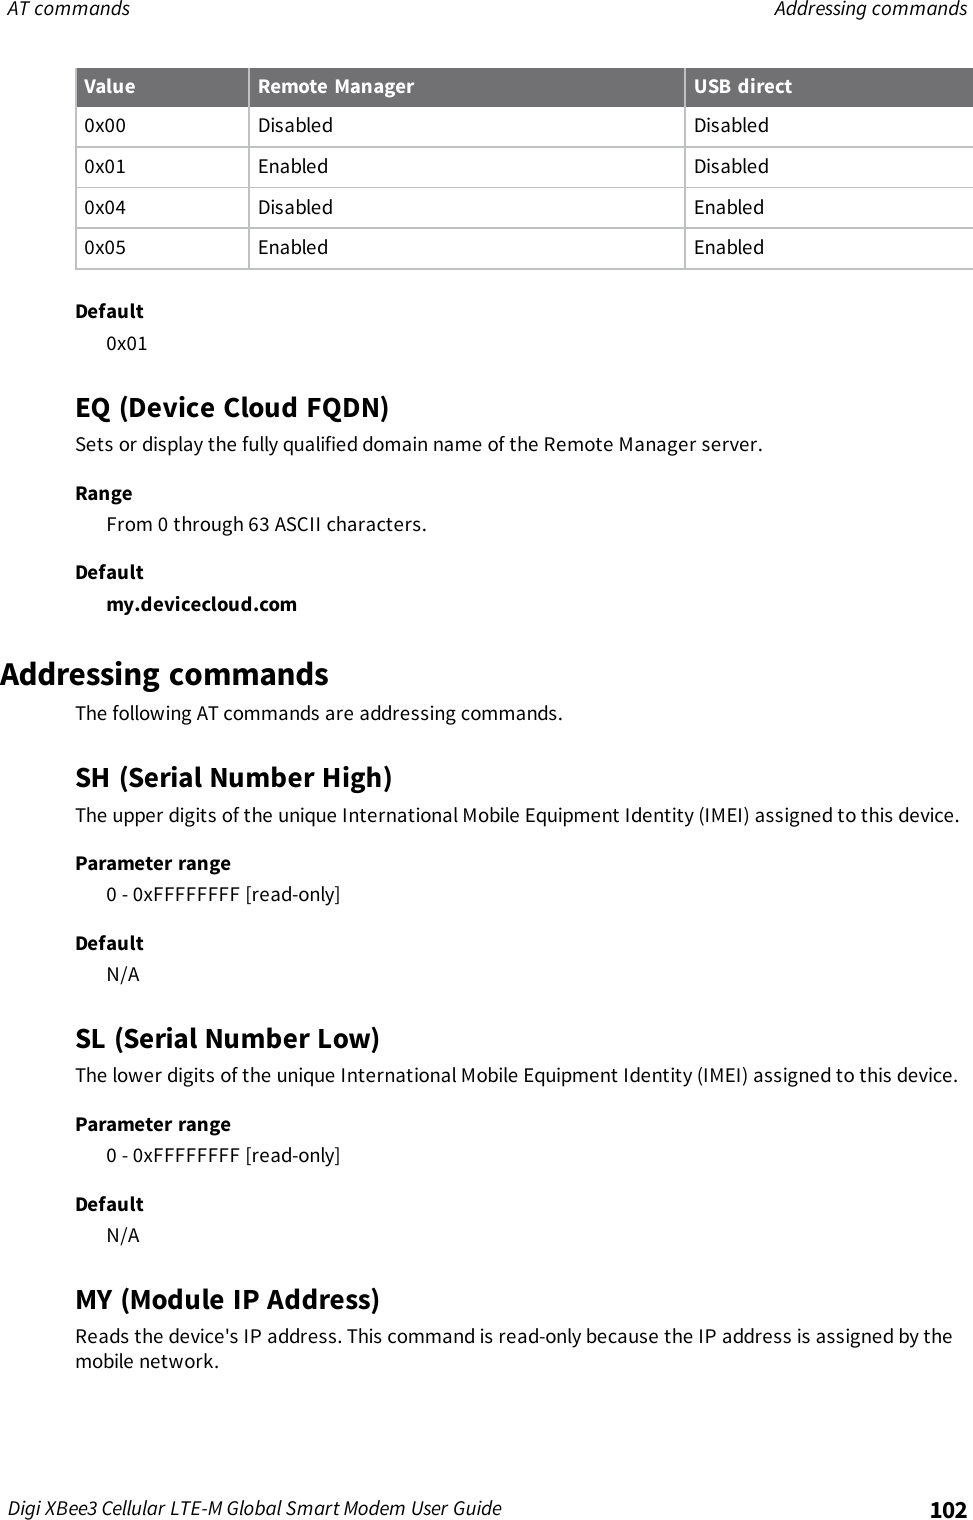 Page 102 of Digi XB3M1 XBee3 Cellular LTE-M User Manual 